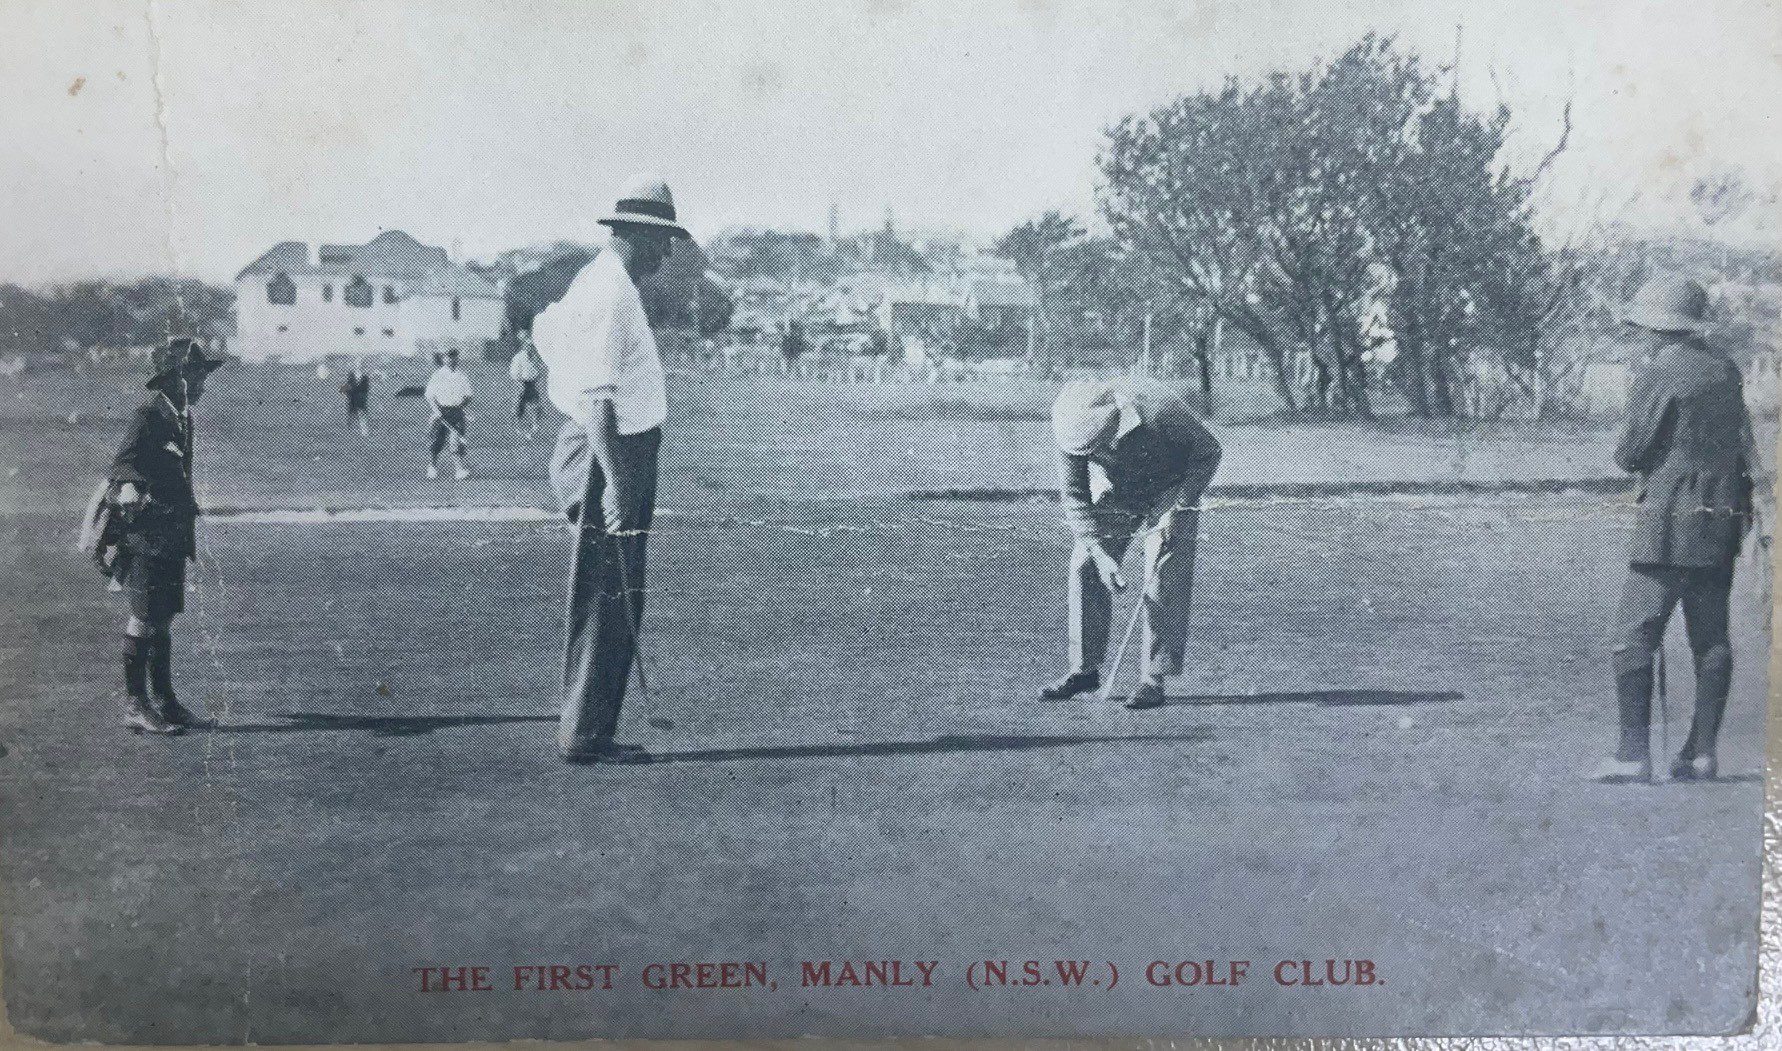 Golfers on the 1st Green at Manly Golf Club